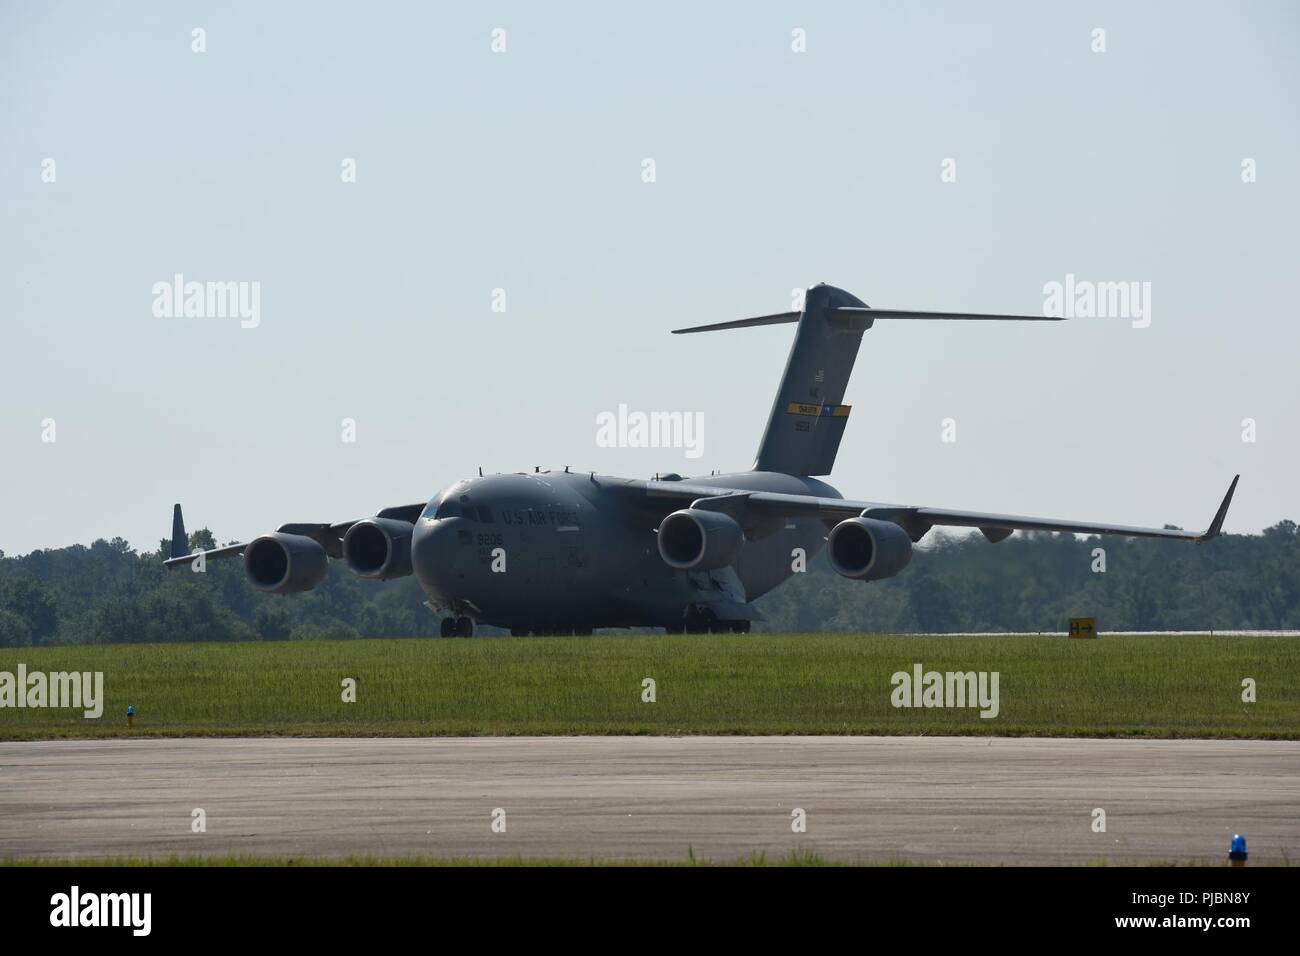 U.S. Airmen of the 169th Fighter Wing of the South Carolina Air National Guard at McEntire Joint National Guard Base, South Carolina, depart in a U.S. Air Force C-17 Globemaster III large transport aircraft from Joint Base Charleston, South Carolina, July 11, 2018. The South Carolina Air National Guard’s 169th Fighter Wing is deploying nearly 300 Airmen and approximately a dozen F-16 Block 52 Fighting Falcon fighter jets to the 407th Air Expeditionary Group in Southwest Asia in support of an Air Expeditionary Force rotation. Stock Photo